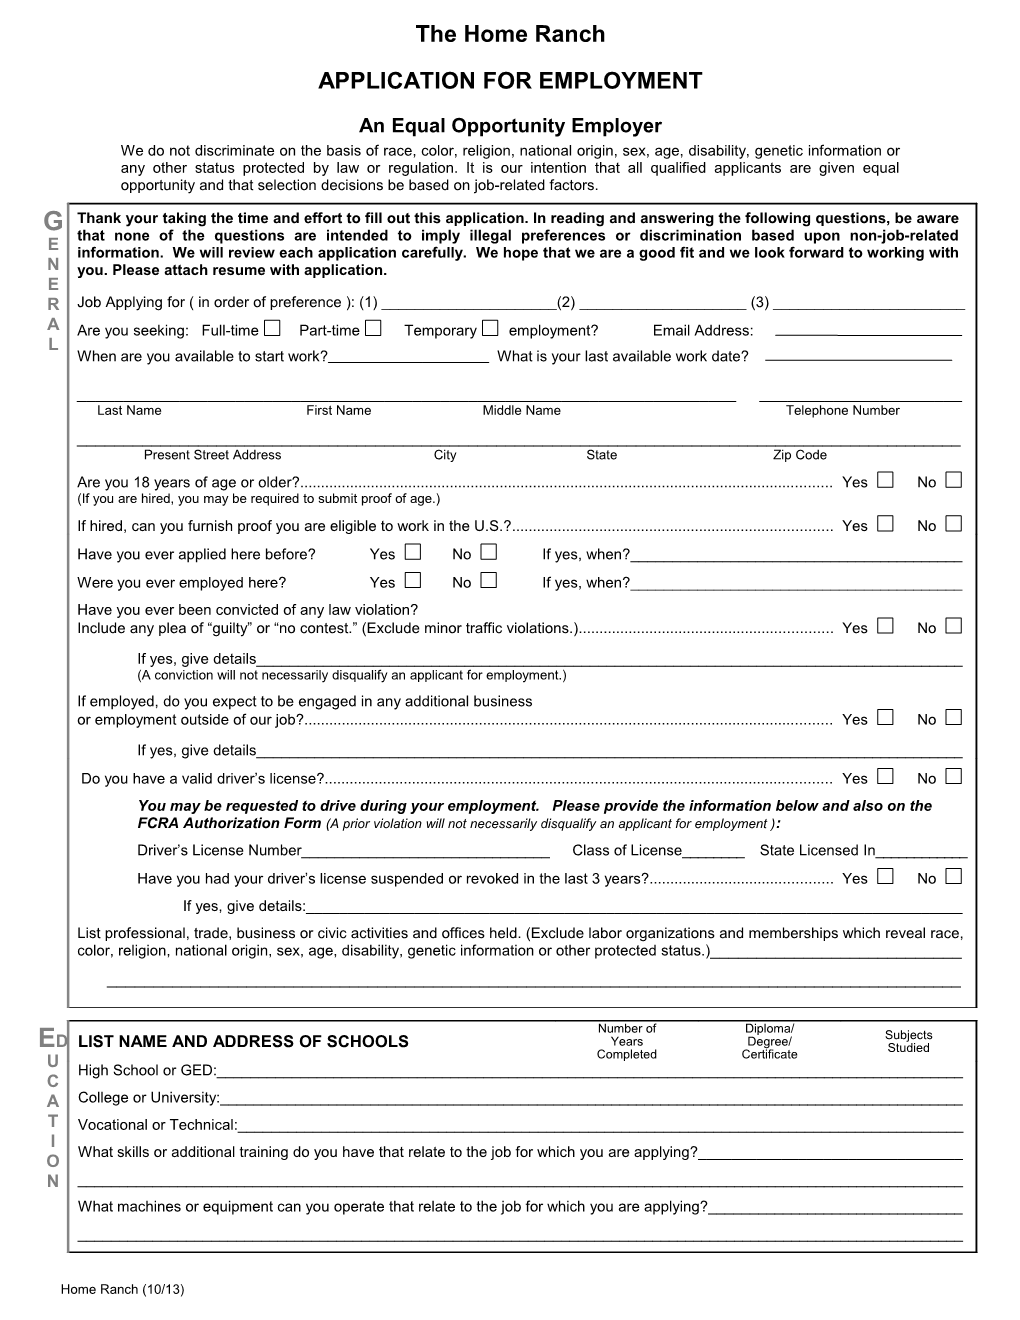 Application for Employment s14